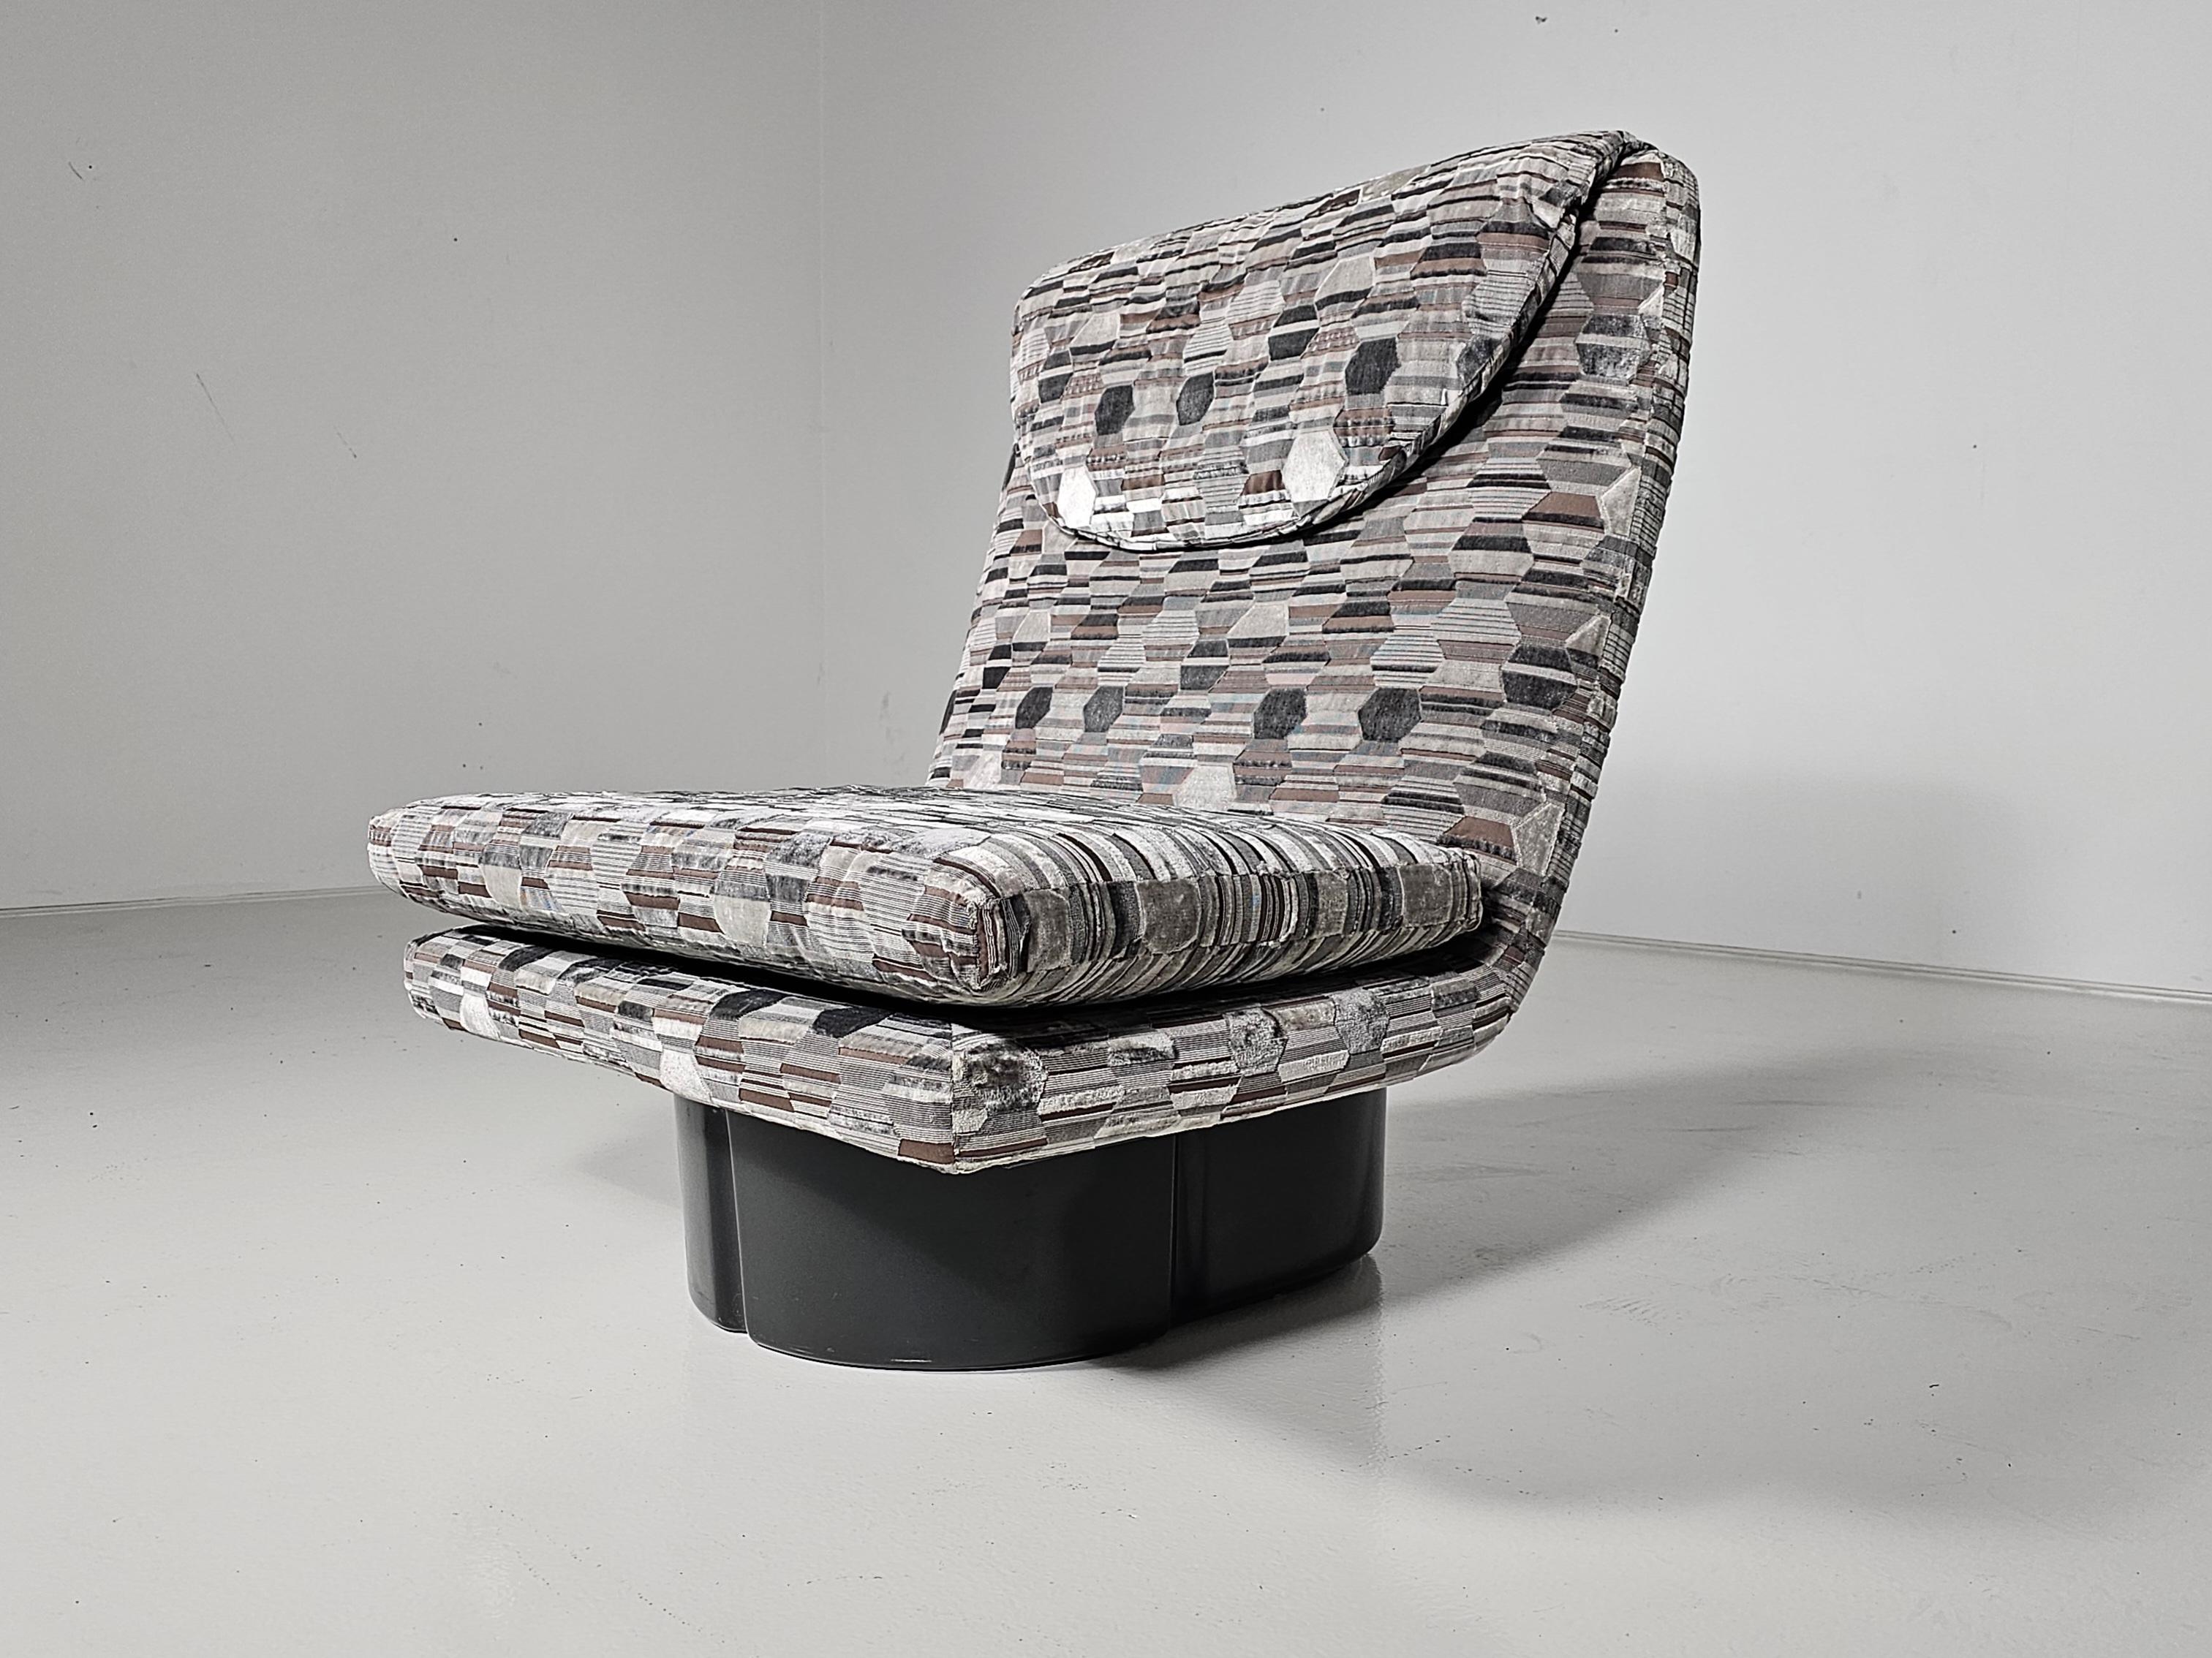 Comfort lounge chair as part of the 175 series designed by T. Ammanati and G.P. Vitelli. Reupholstered in a stunning textured Zinc fabric. With steel grey molded acrylic base. Super comfortable. Visible scratches on the acrylic frame.

